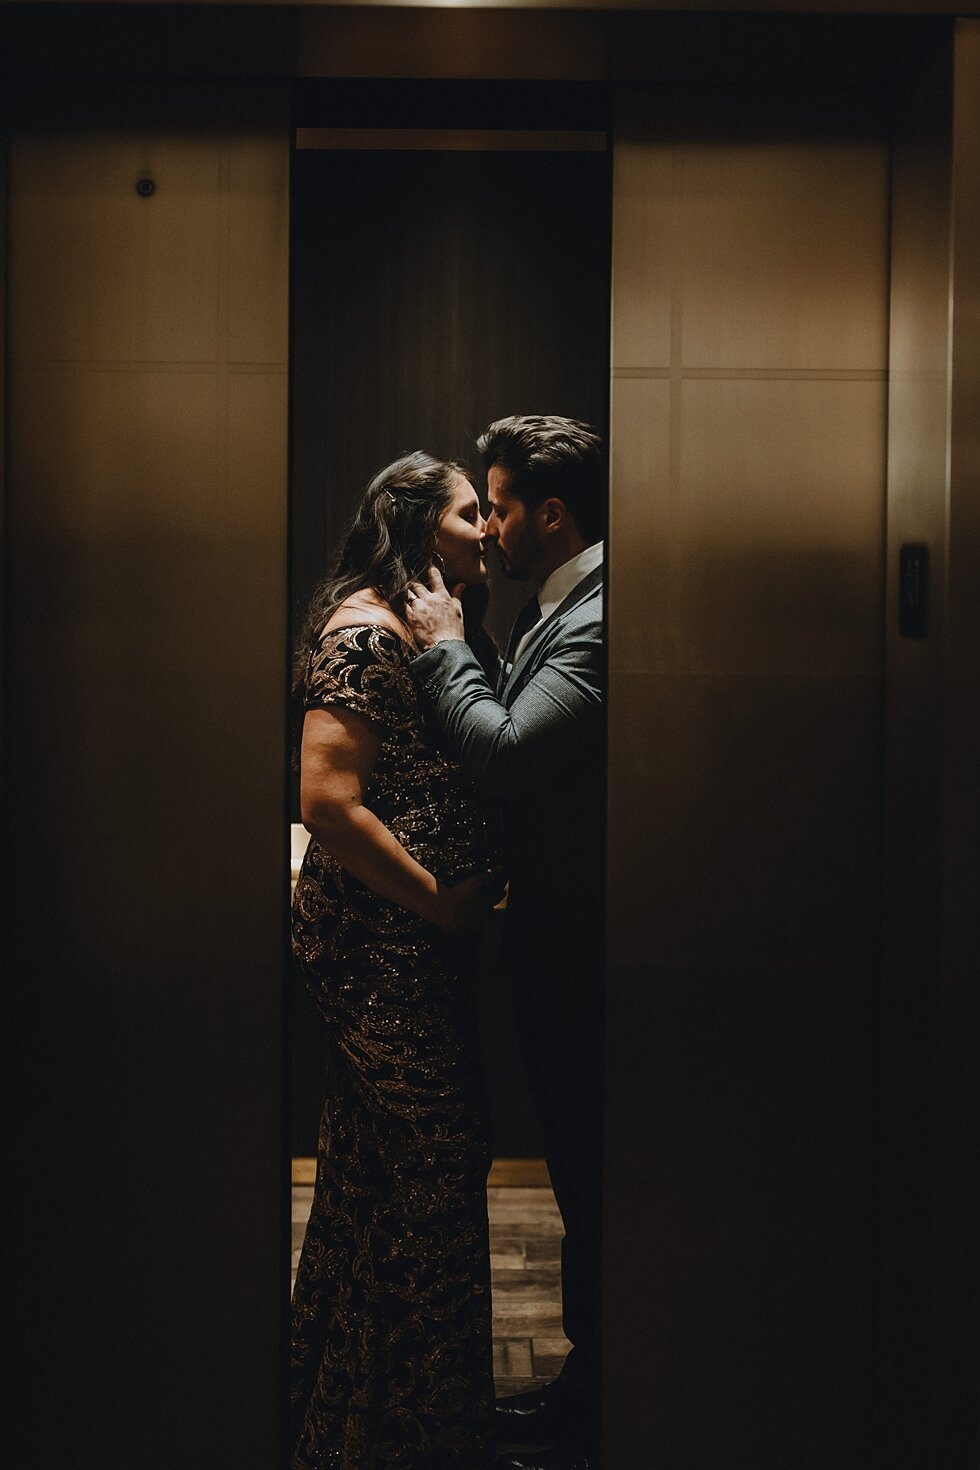  This elegant maternity session got a little seamy as this mom and dad to be couldn’t help but notice how good they both looked! #maternitygoals #maternityphotographer #babybump #kentuckyphotographer #fancymaternitysession #modernmaternitysession #ur